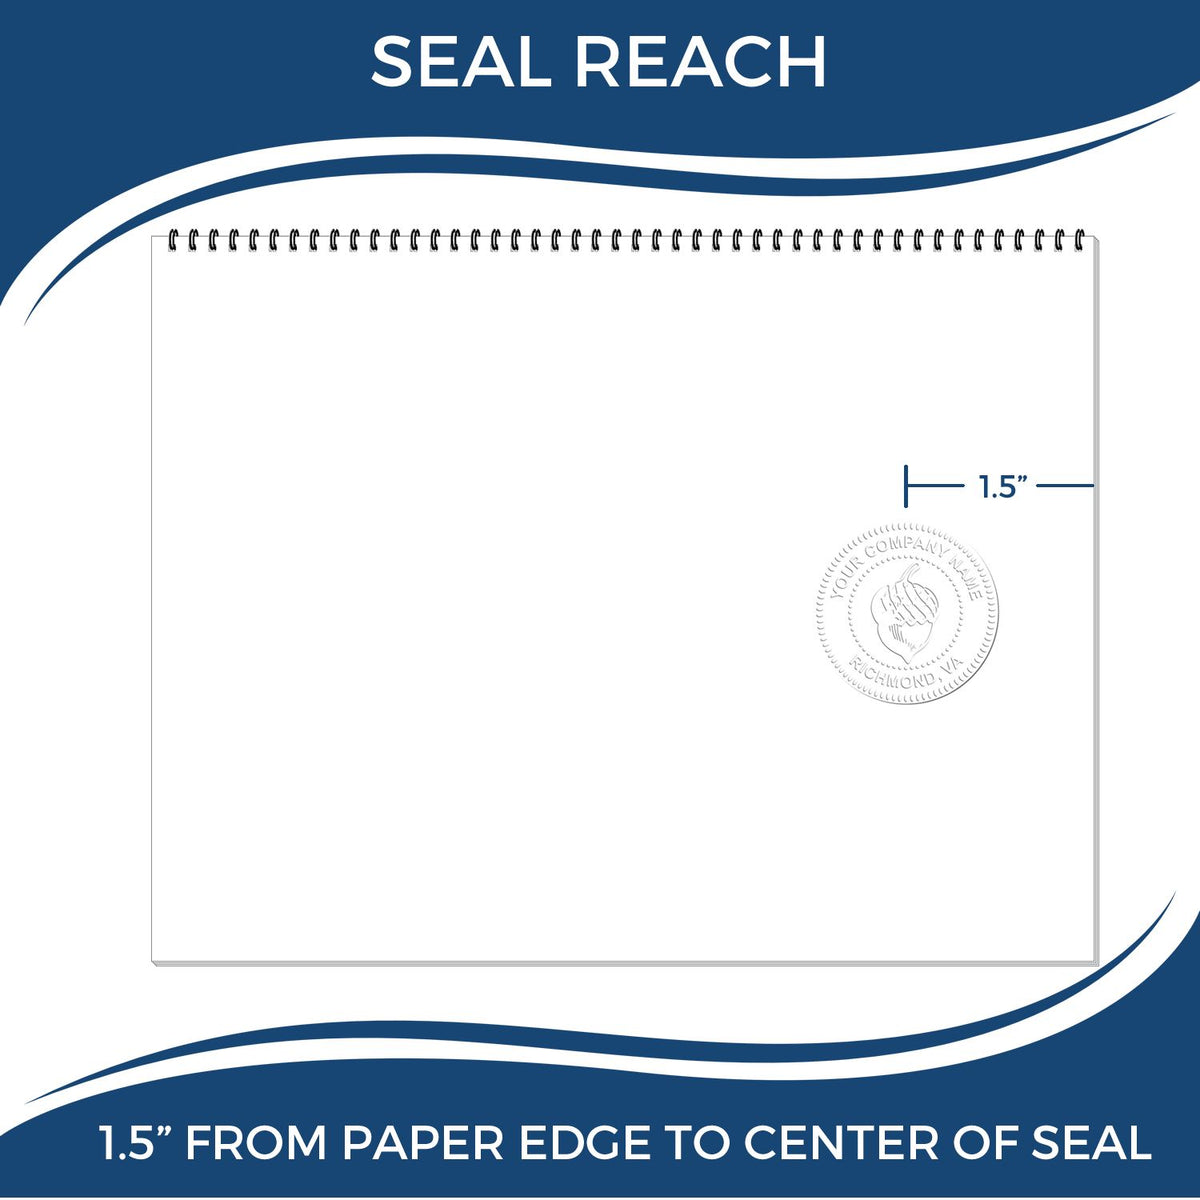 An infographic showing the seal reach which is represented by a ruler and a miniature seal image of the Soft Michigan Professional Engineer Seal